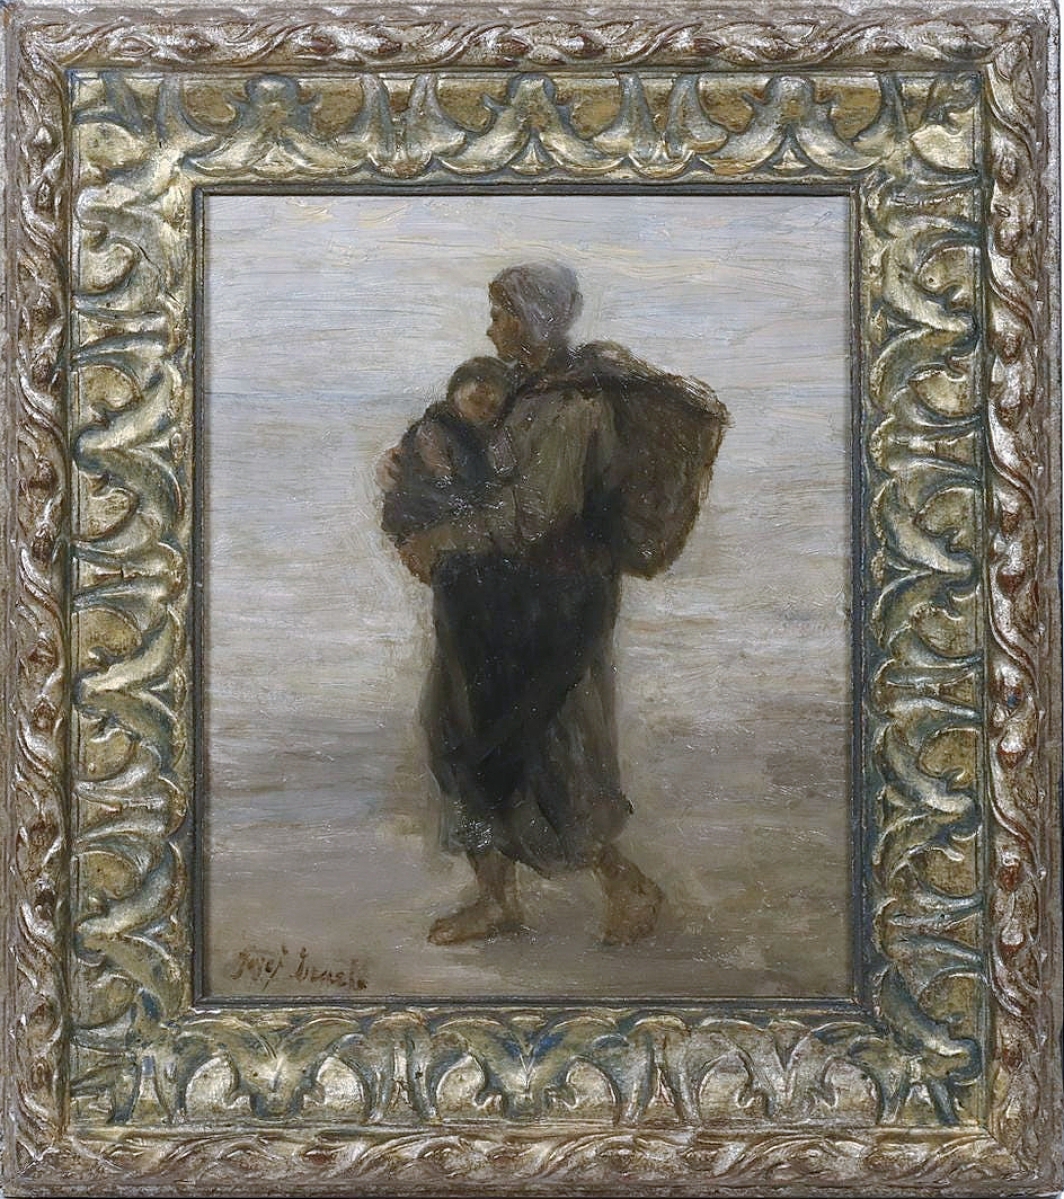 Dutch artist Jozef Israëls’ (1824-1911) “Mother Carrying Her Child” would go on to sell for $24,000. The work had an Alexander Gallery label and measured 11 by 8 inches. Israels was a leader of the Hague School and regarded as among the country’s finest painters of his time. Much of his most lauded work focuses on the dark pity evoked by everyday life.